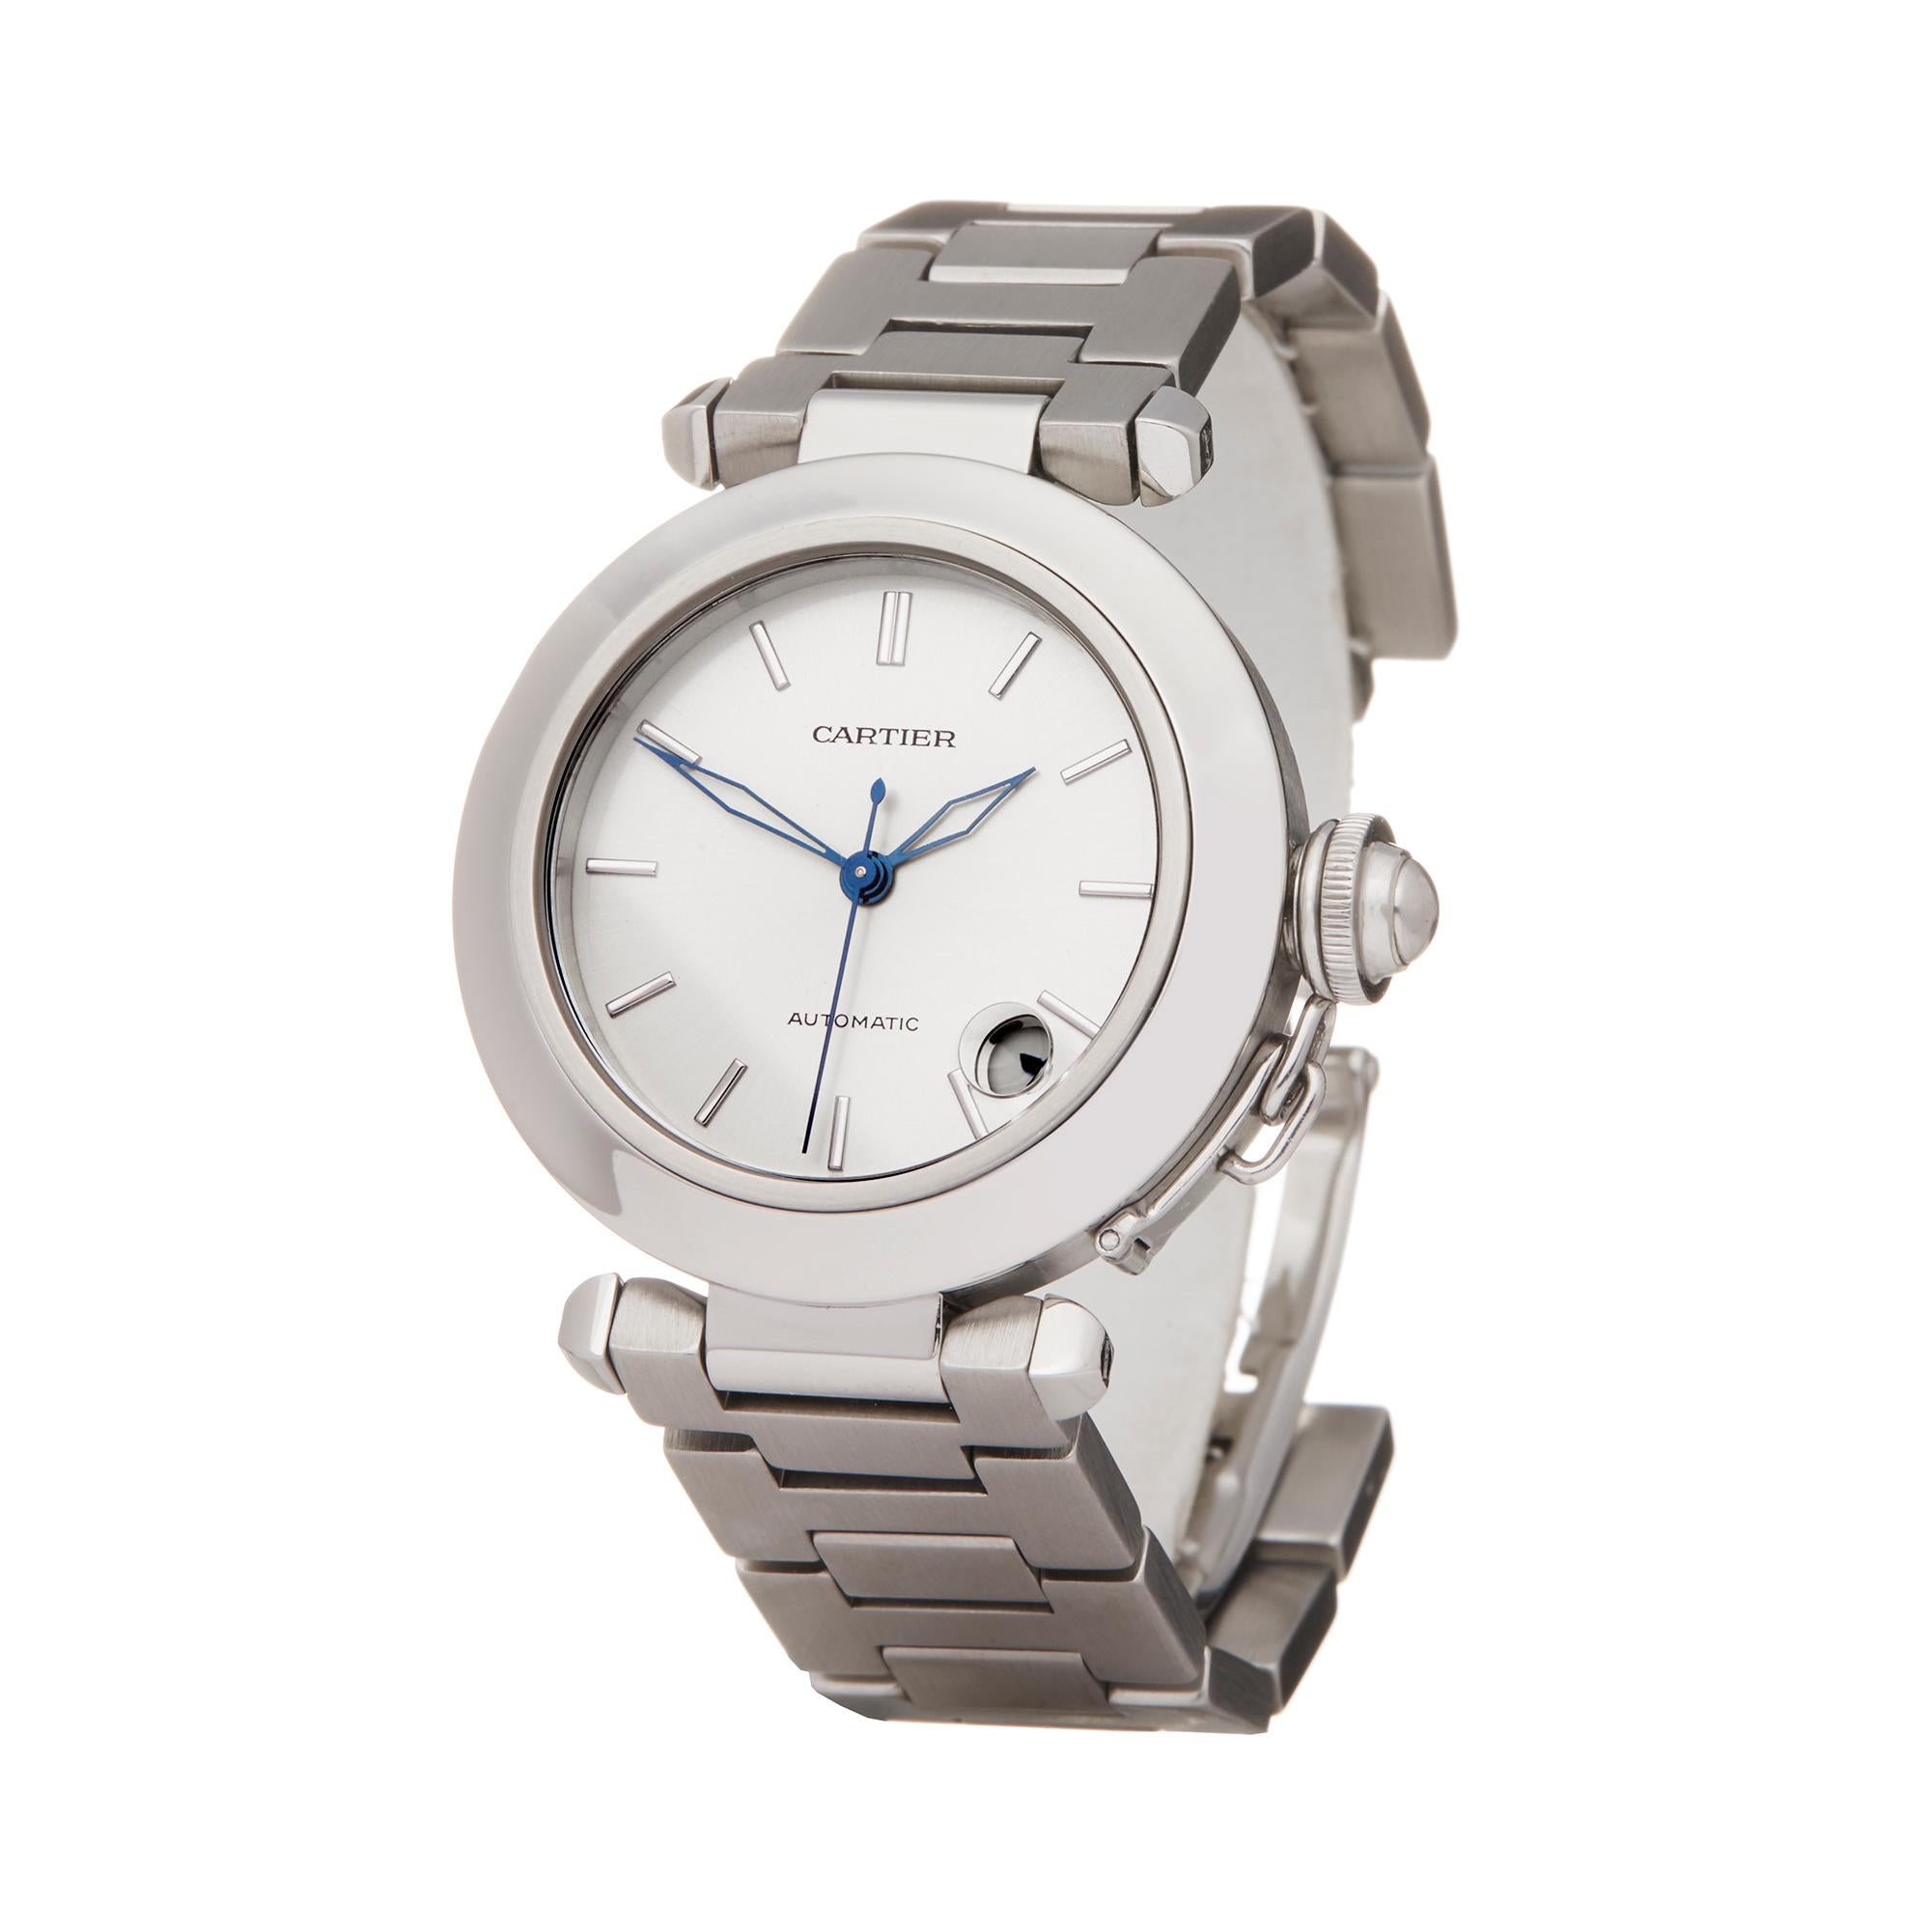 Ref: COM2079
Manufacturer: Cartier
Model: Pasha De Cartier
Model Ref: W31010M7 or 2324
Age: Circa 2000's
Gender: Unisex
Complete With: Cartier Service Pouch and Service Papers dated 17th May 2019
Dial: Silver Baton
Glass: Sapphire Crystal
Movement: